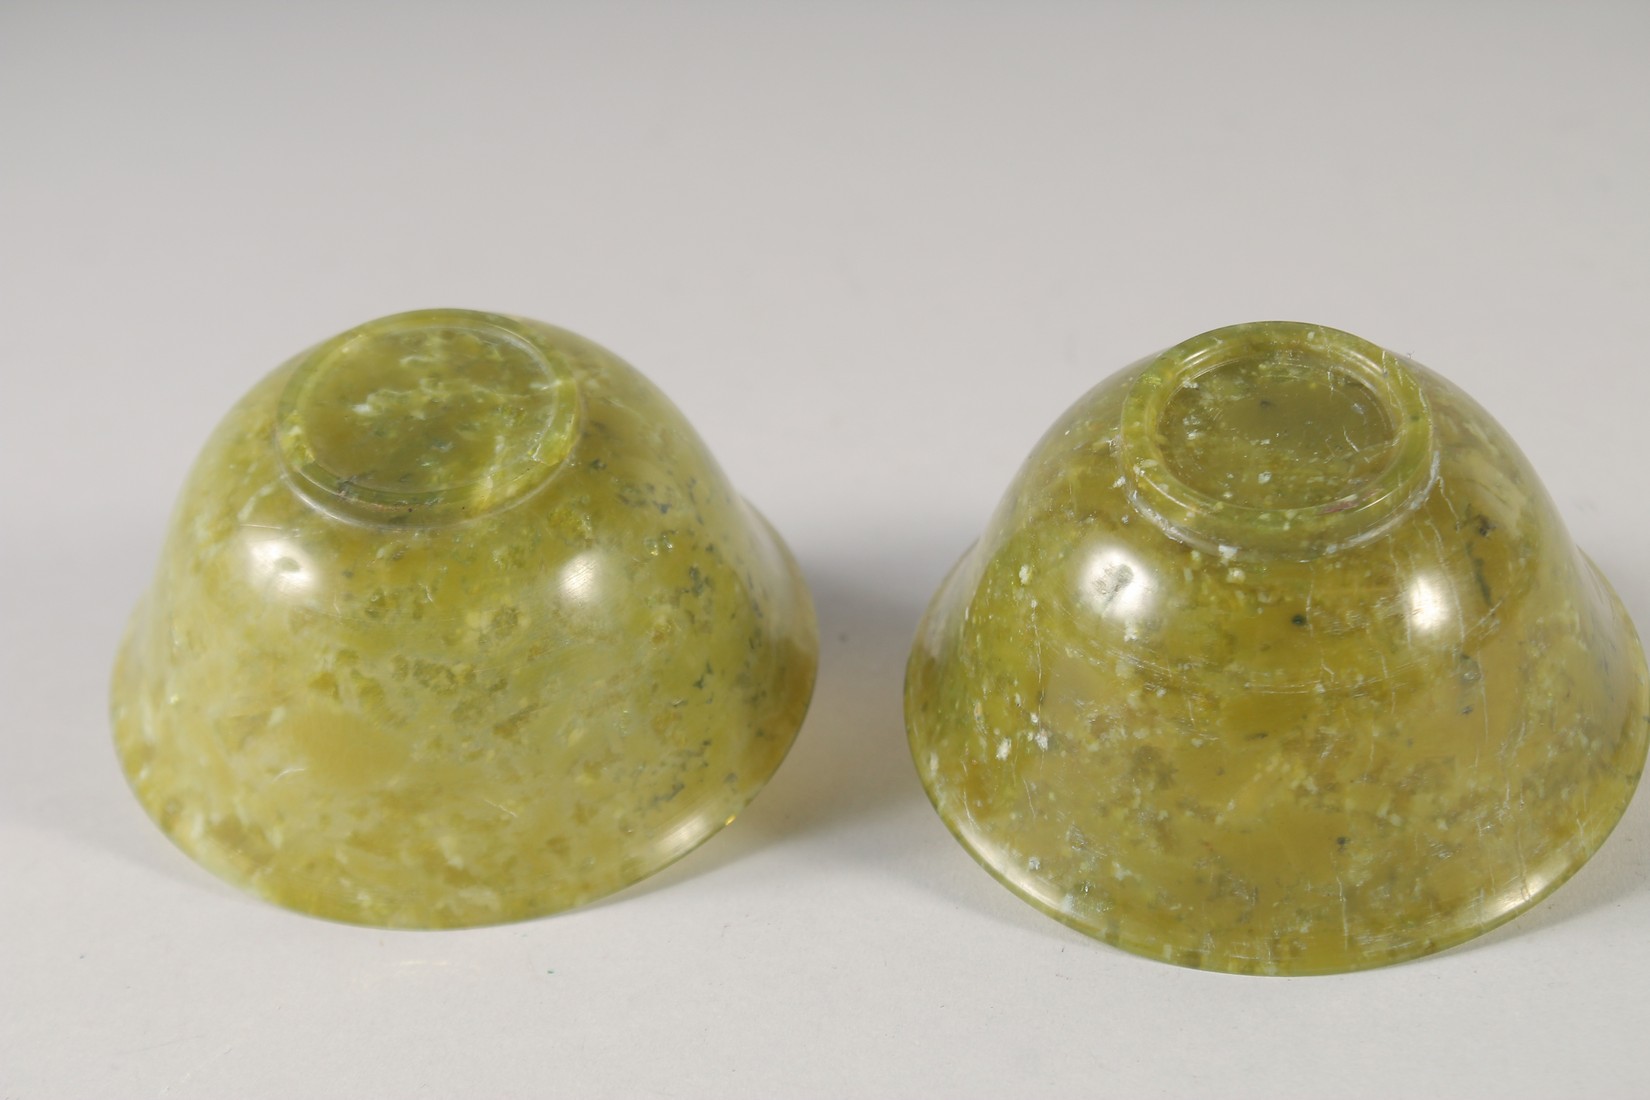 A PAIR OF JADE BOWLS, on hardwood stands, bowls 10cm diameter. - Image 5 of 5